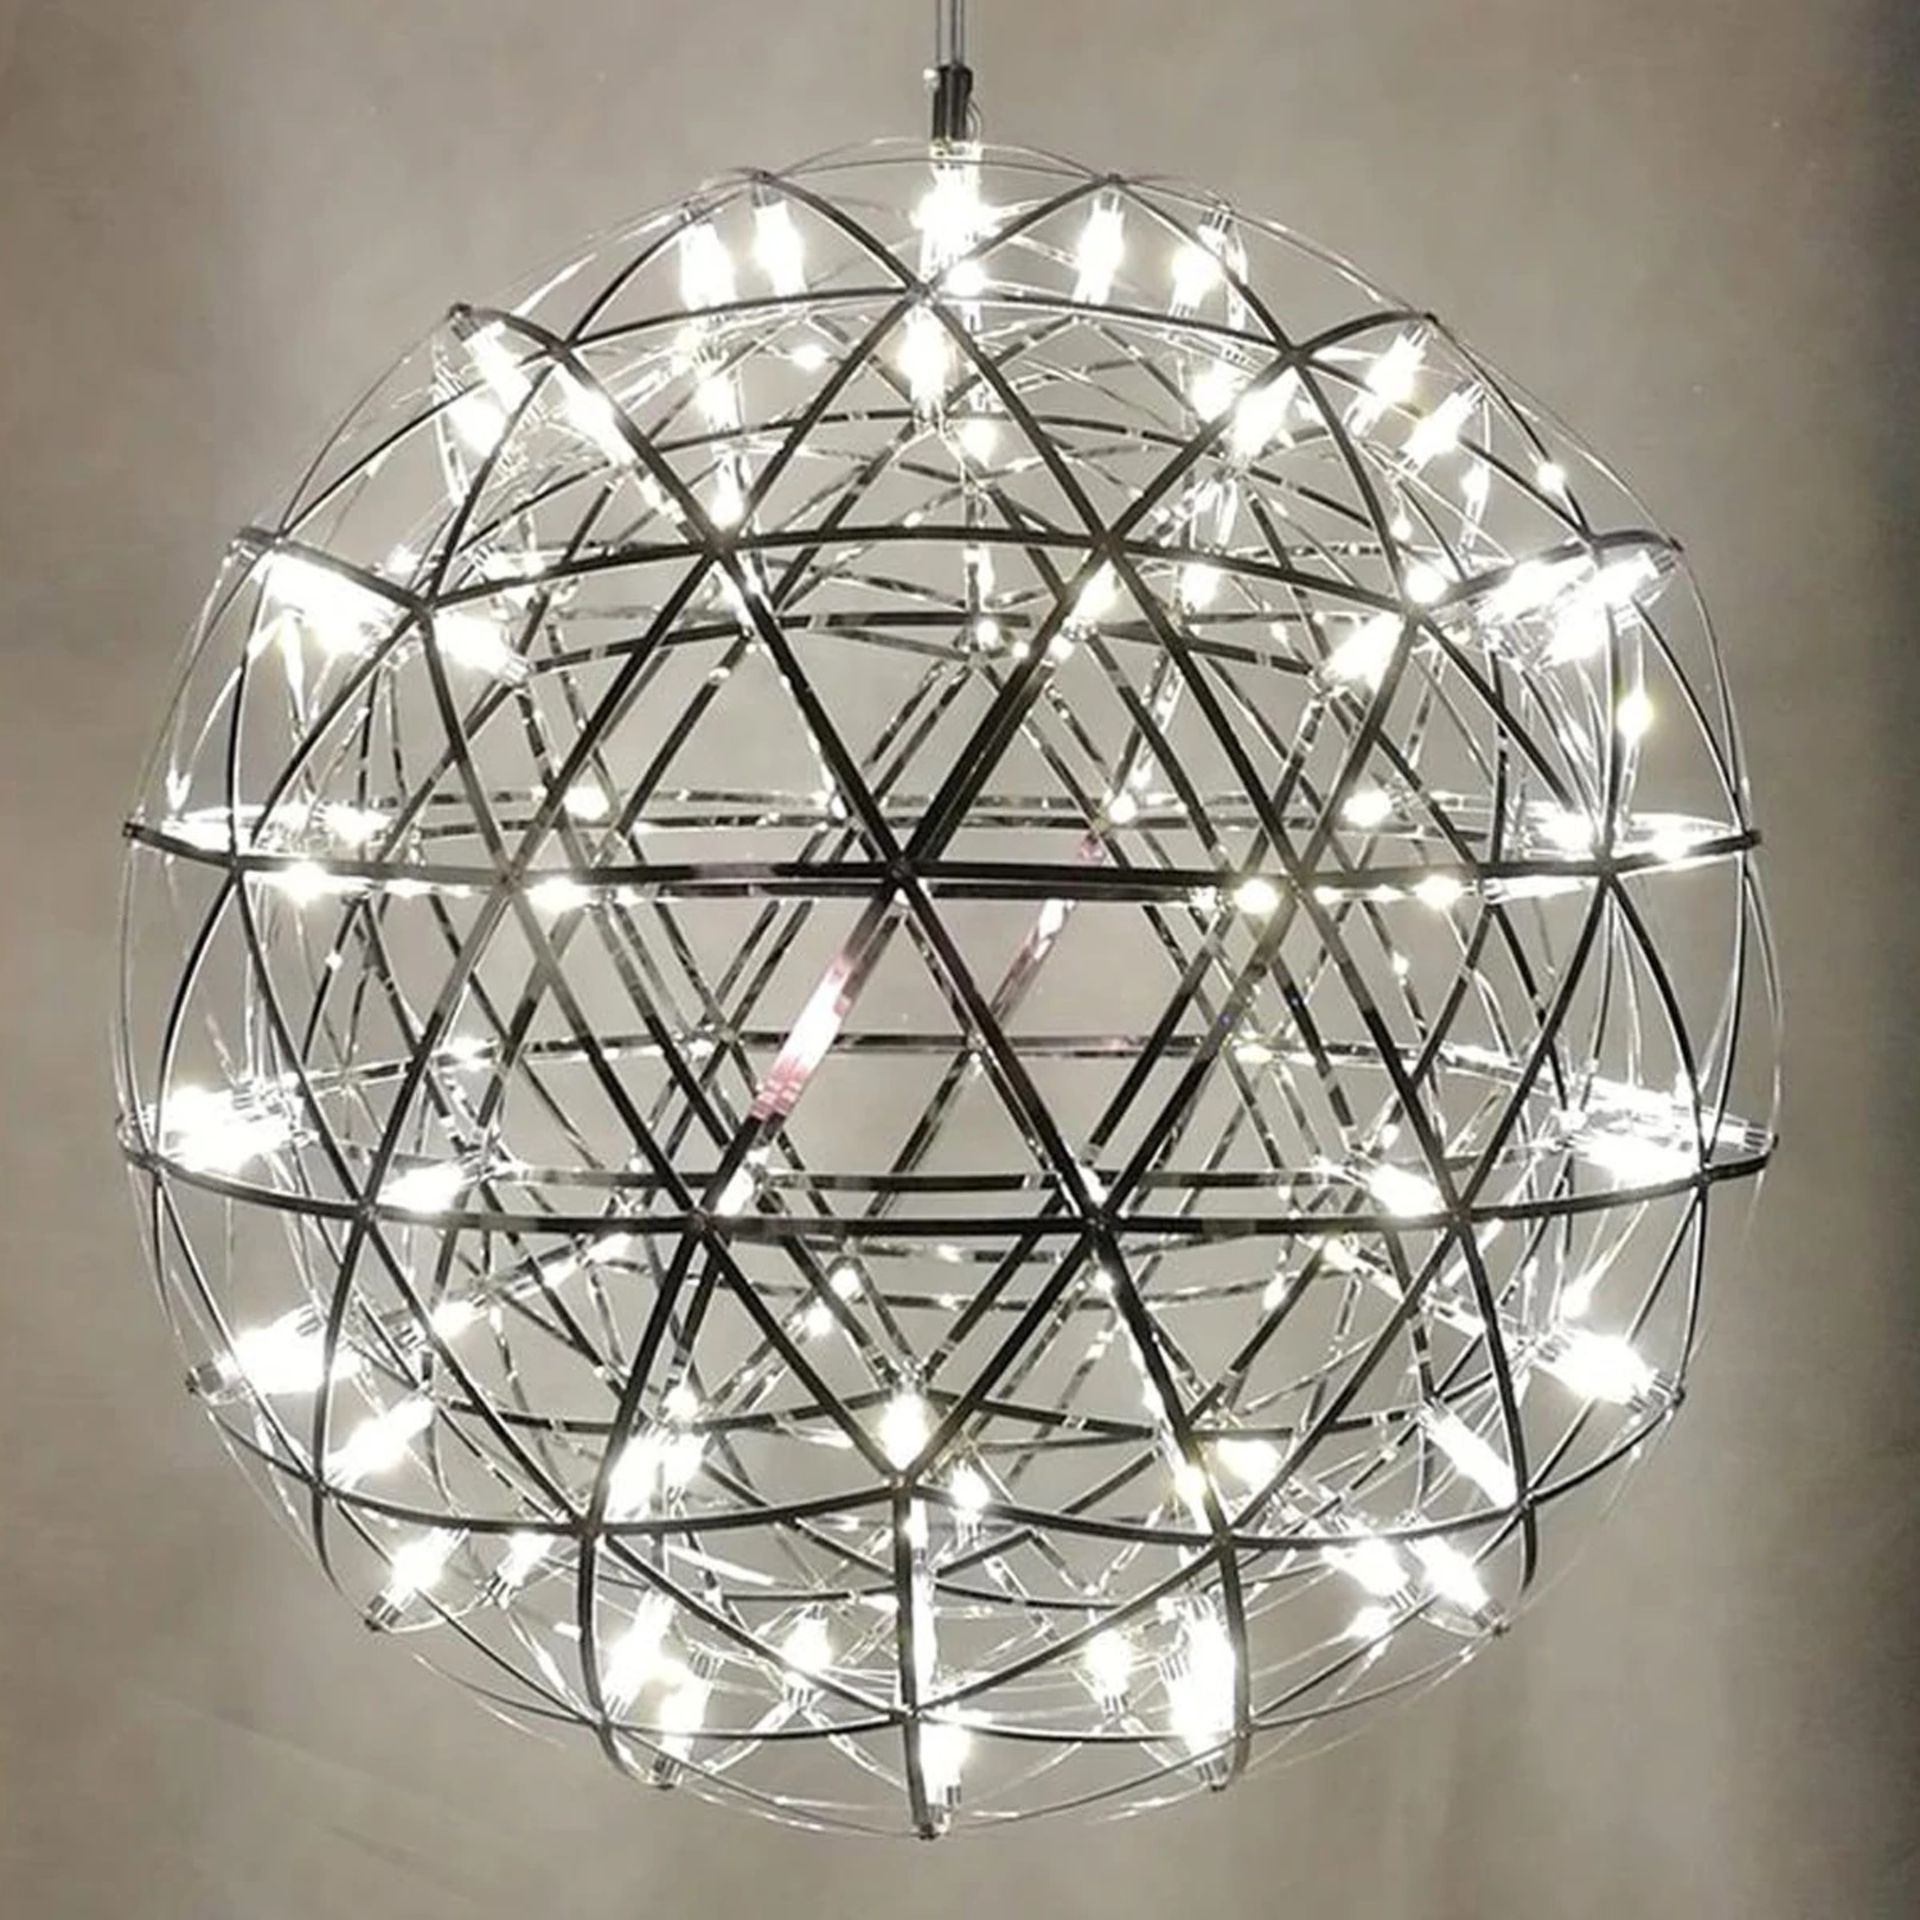 Starburst Hanging Pendant 30cm diameter x 42 lights with its chrome bodied spherical globe and - Image 2 of 3